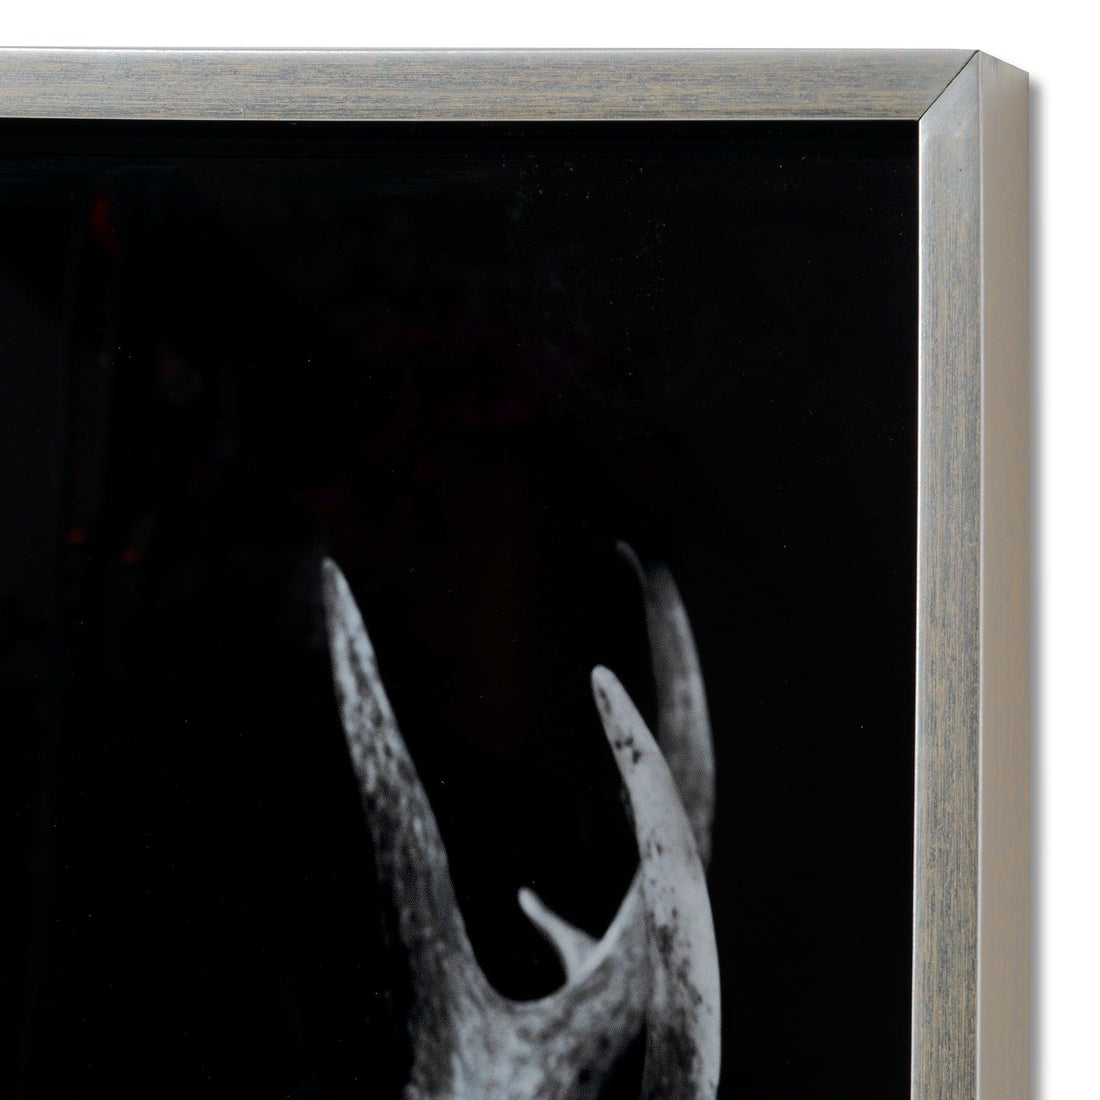 Dark Stag Glass Image with Silver Frame - £169.95 - Art & Printed Products > Printed Art > Animal Printed Art 